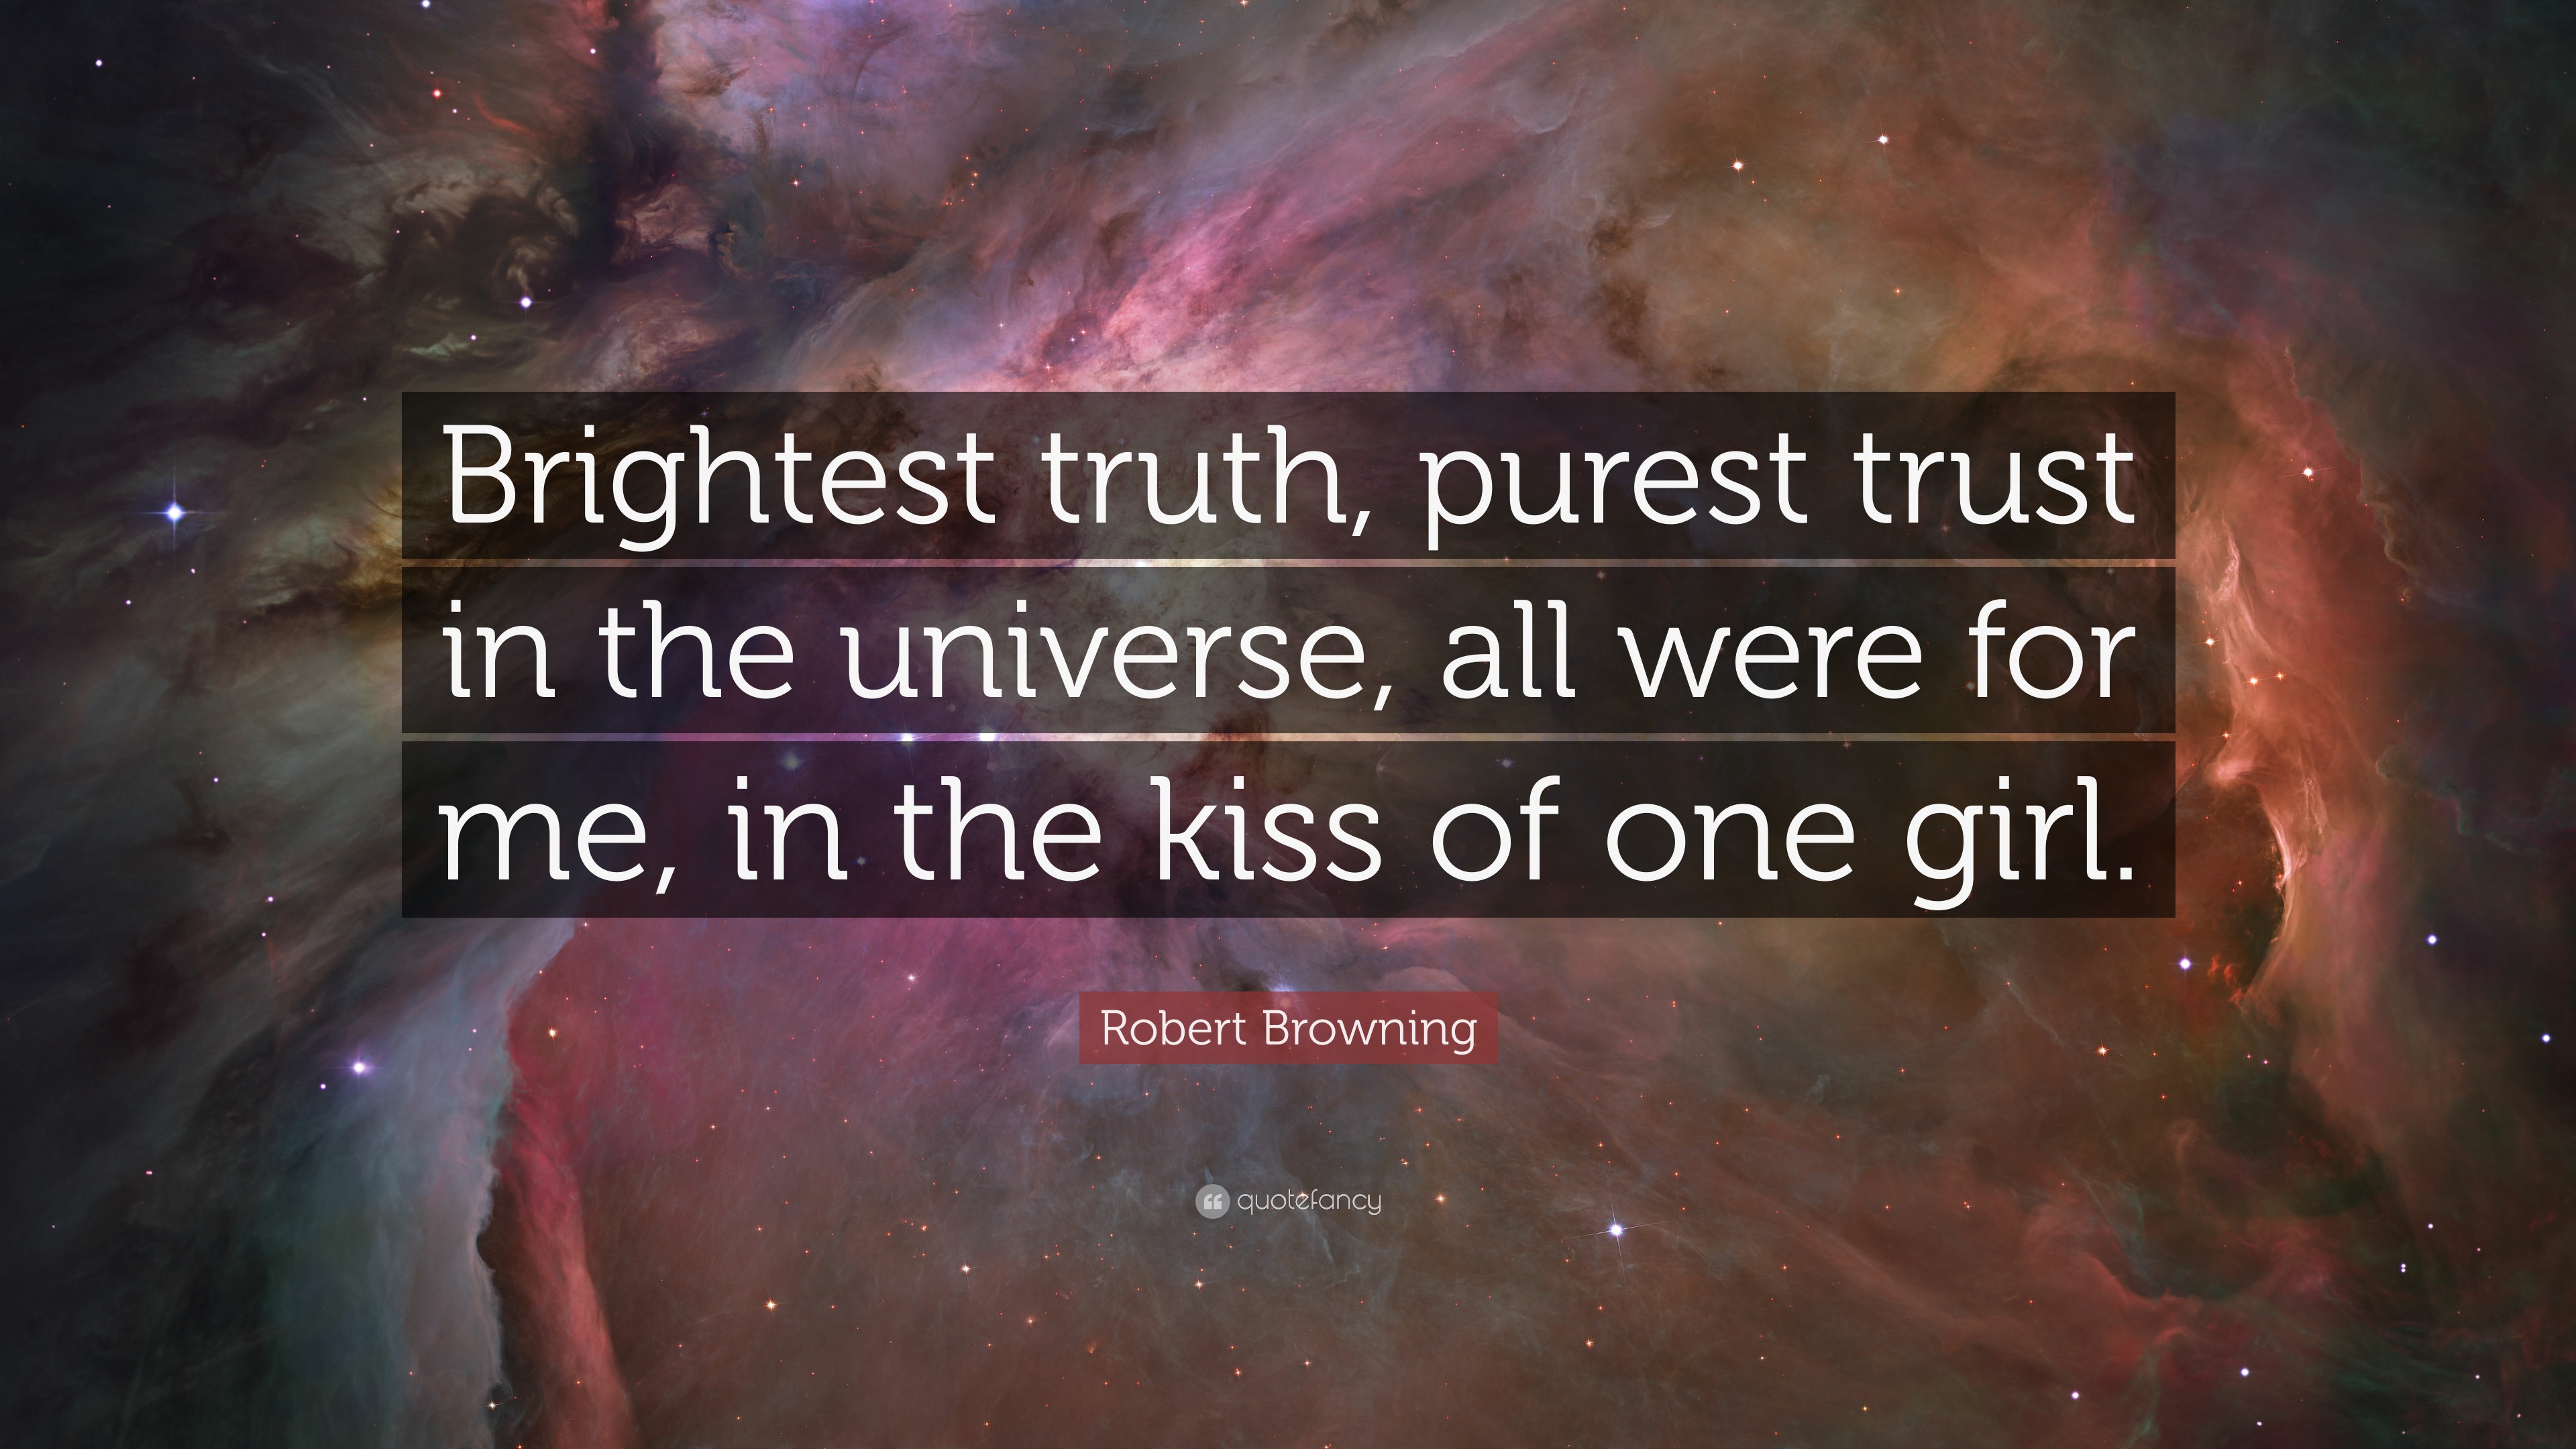 Robert Browning Quote “brightest Truth Purest Trust In The Universe All Were For Me In The